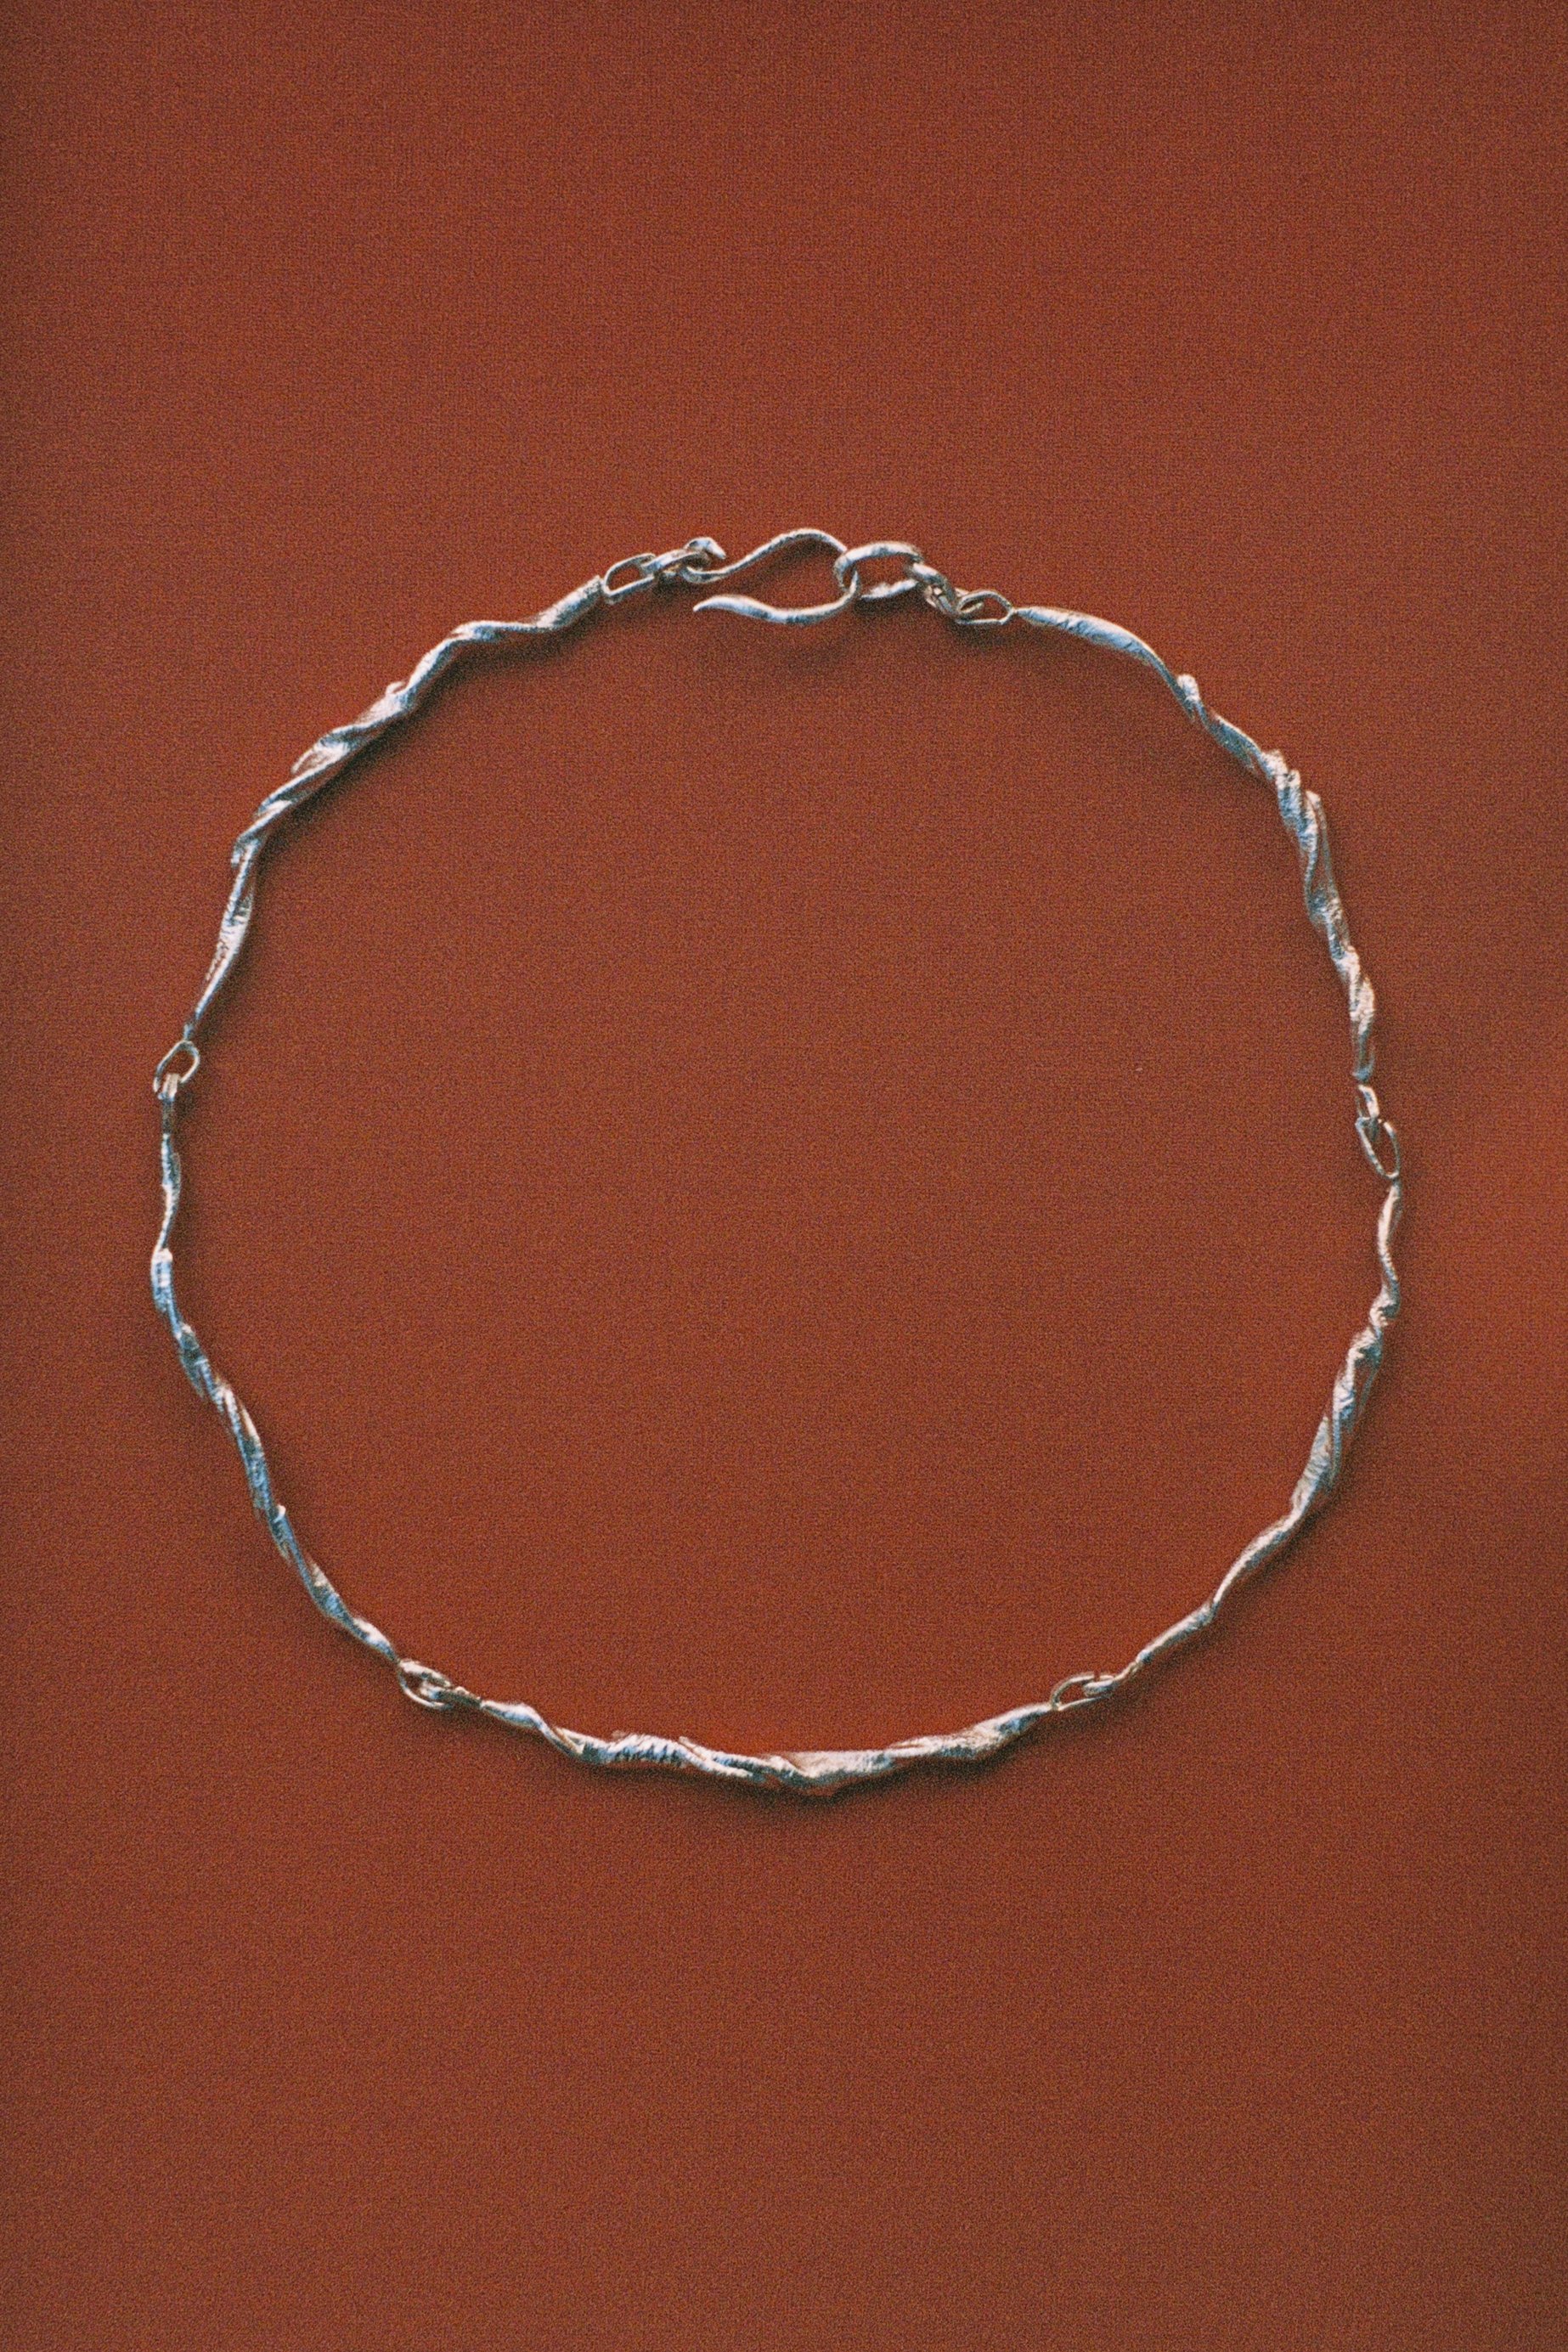 Image of Edition 5. Piece 7. Necklace